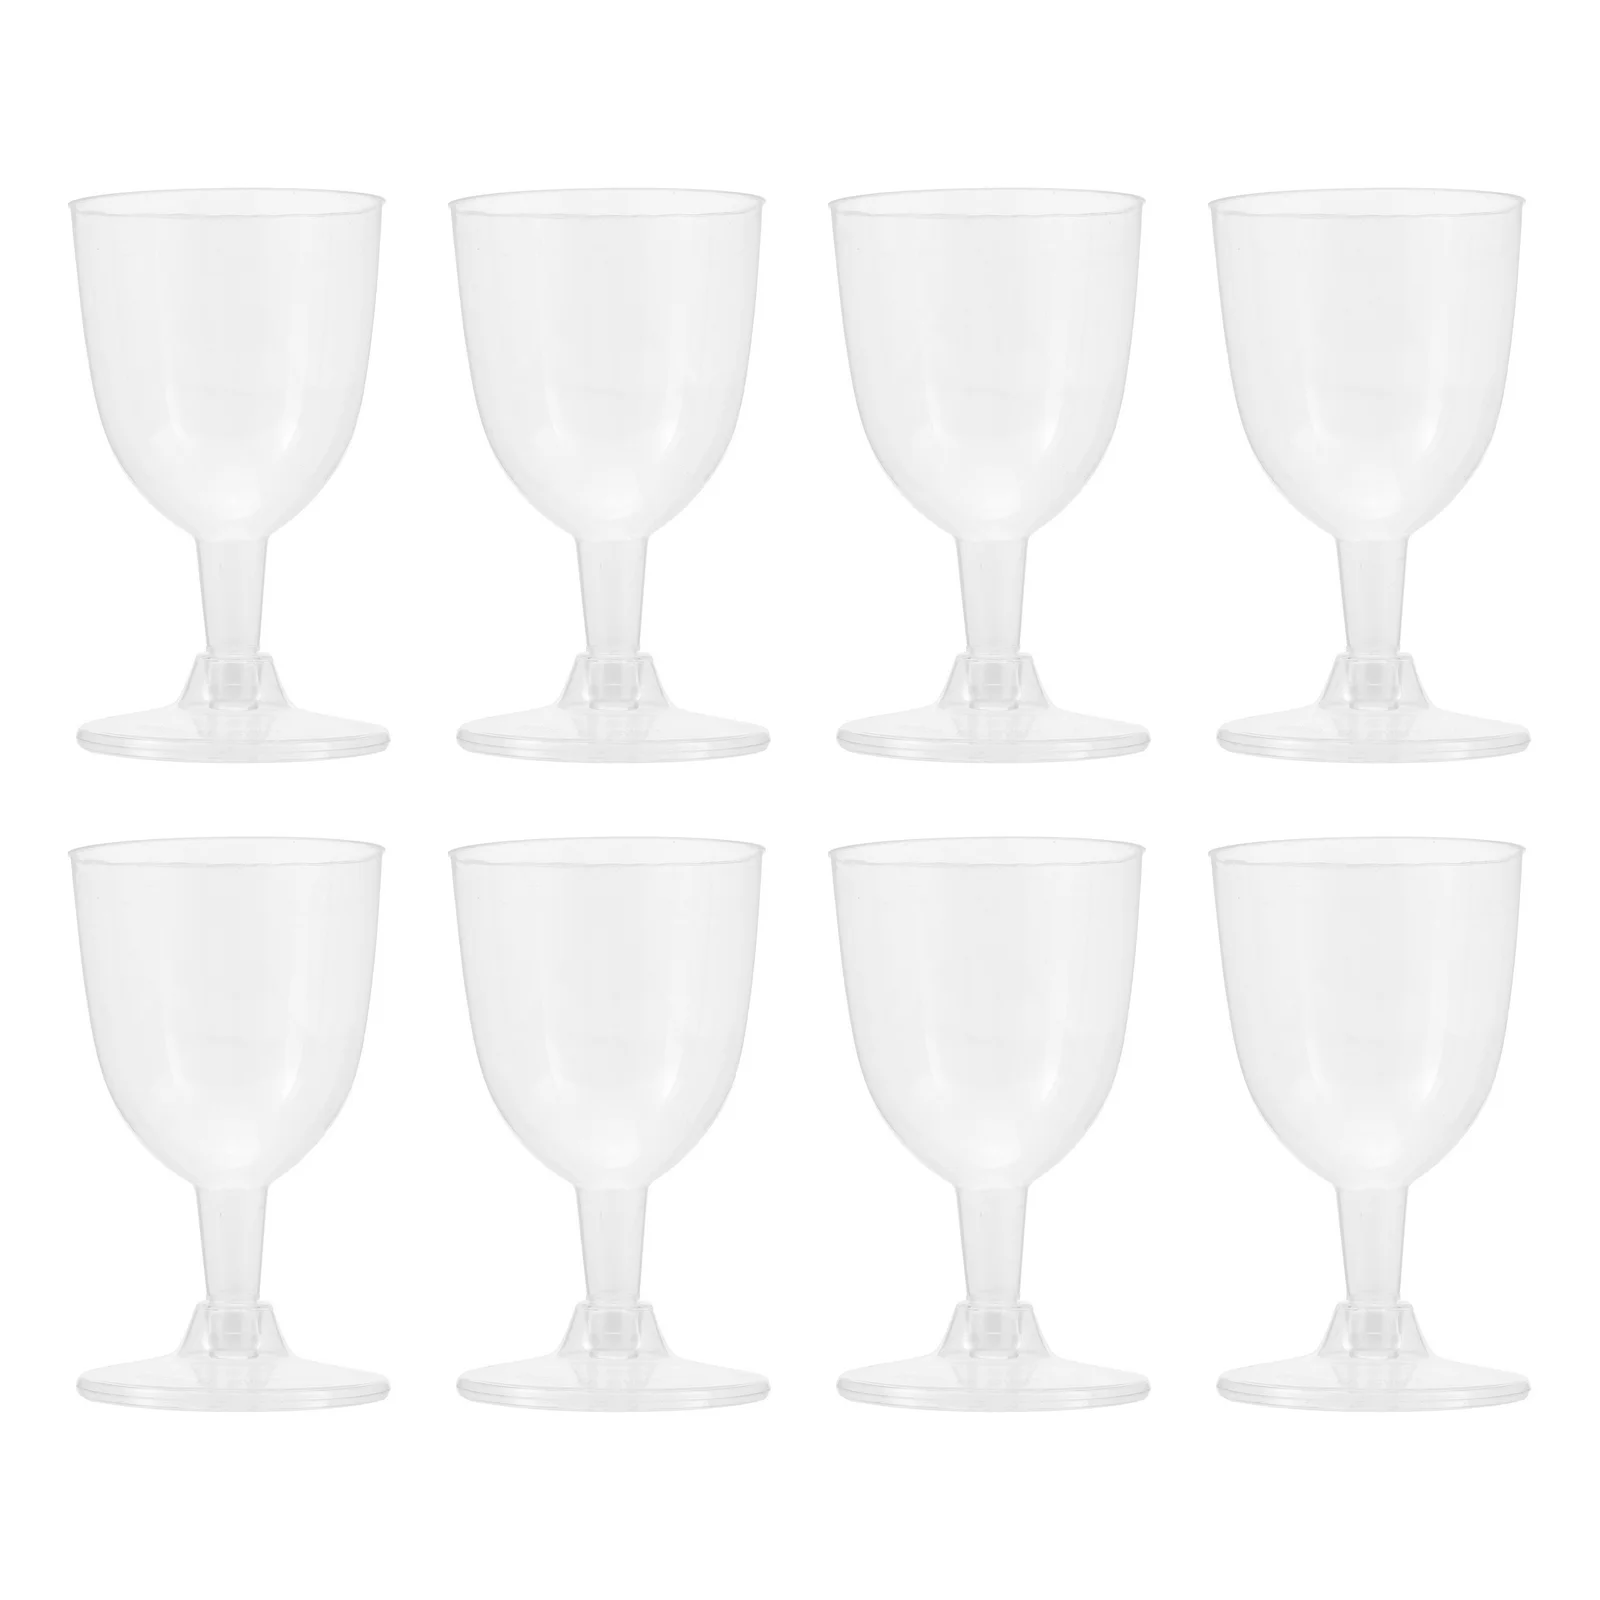 

Cups Bowl Cup Dessert Pudding Mousse Ice Cream Party Clear Mini Wedding Disposable Cocktail Glasses Dish Toasting Goblets Bar